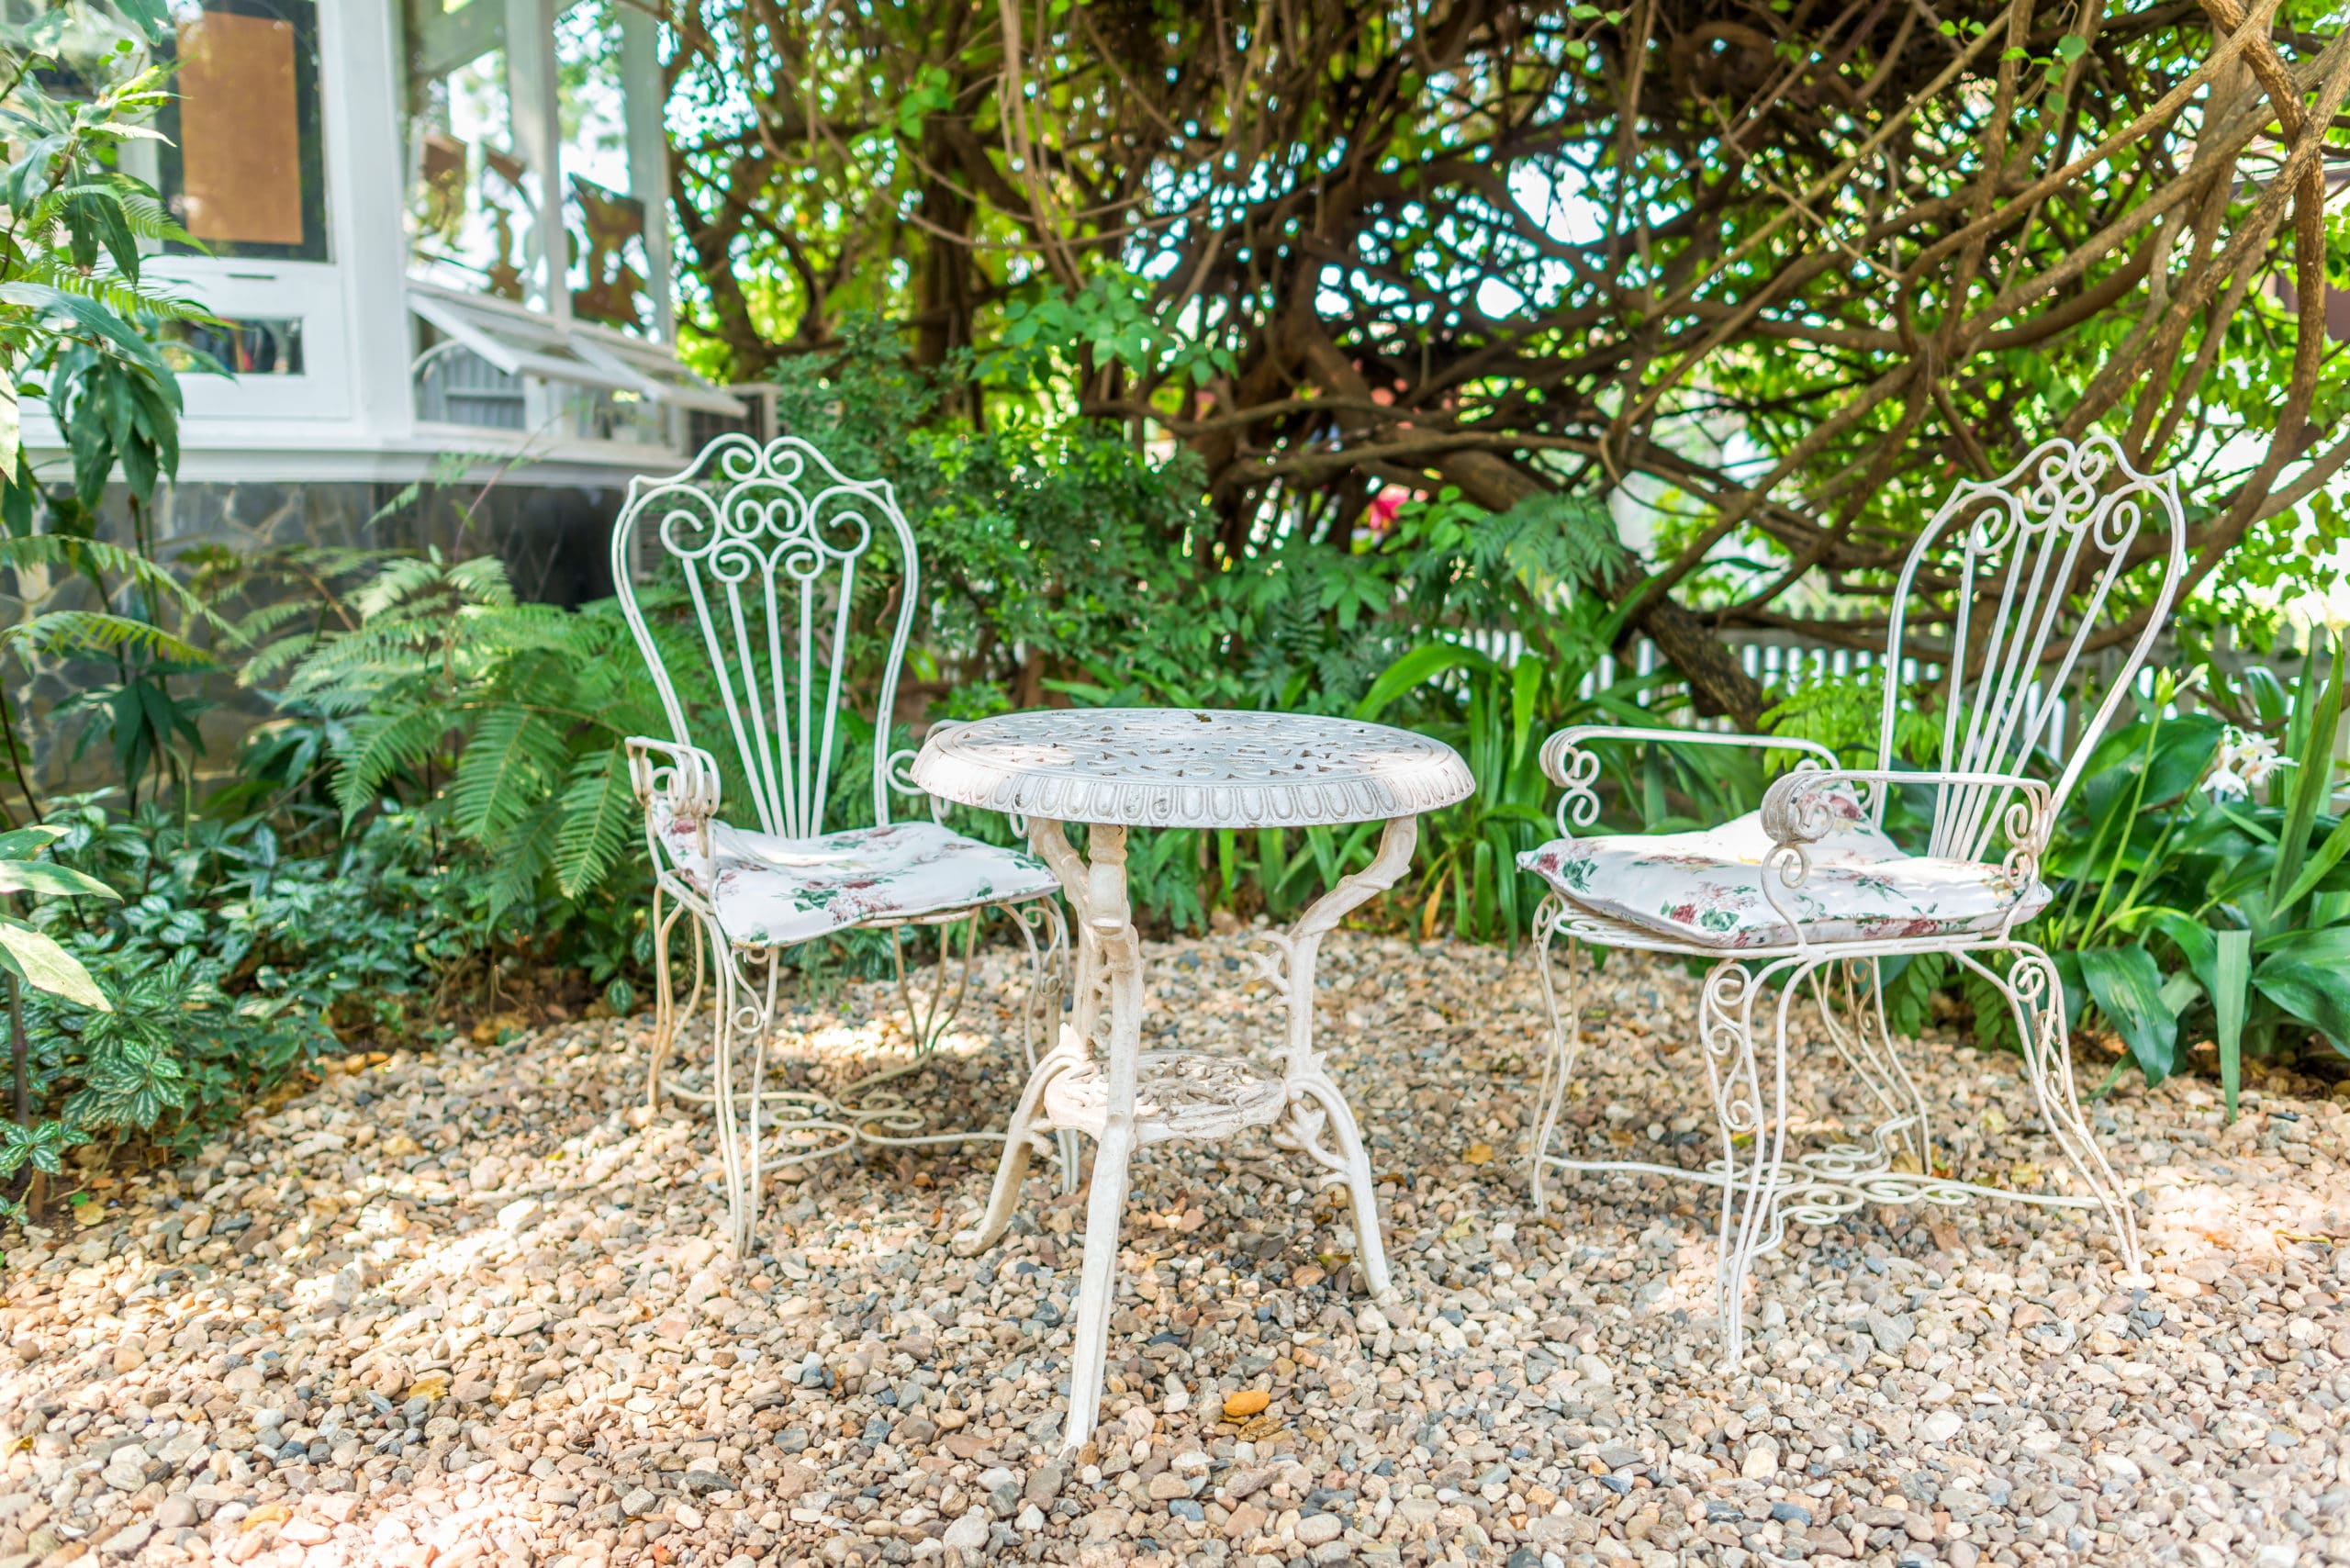 How To Paint Outdoor Furniture Using a Paint Sprayer